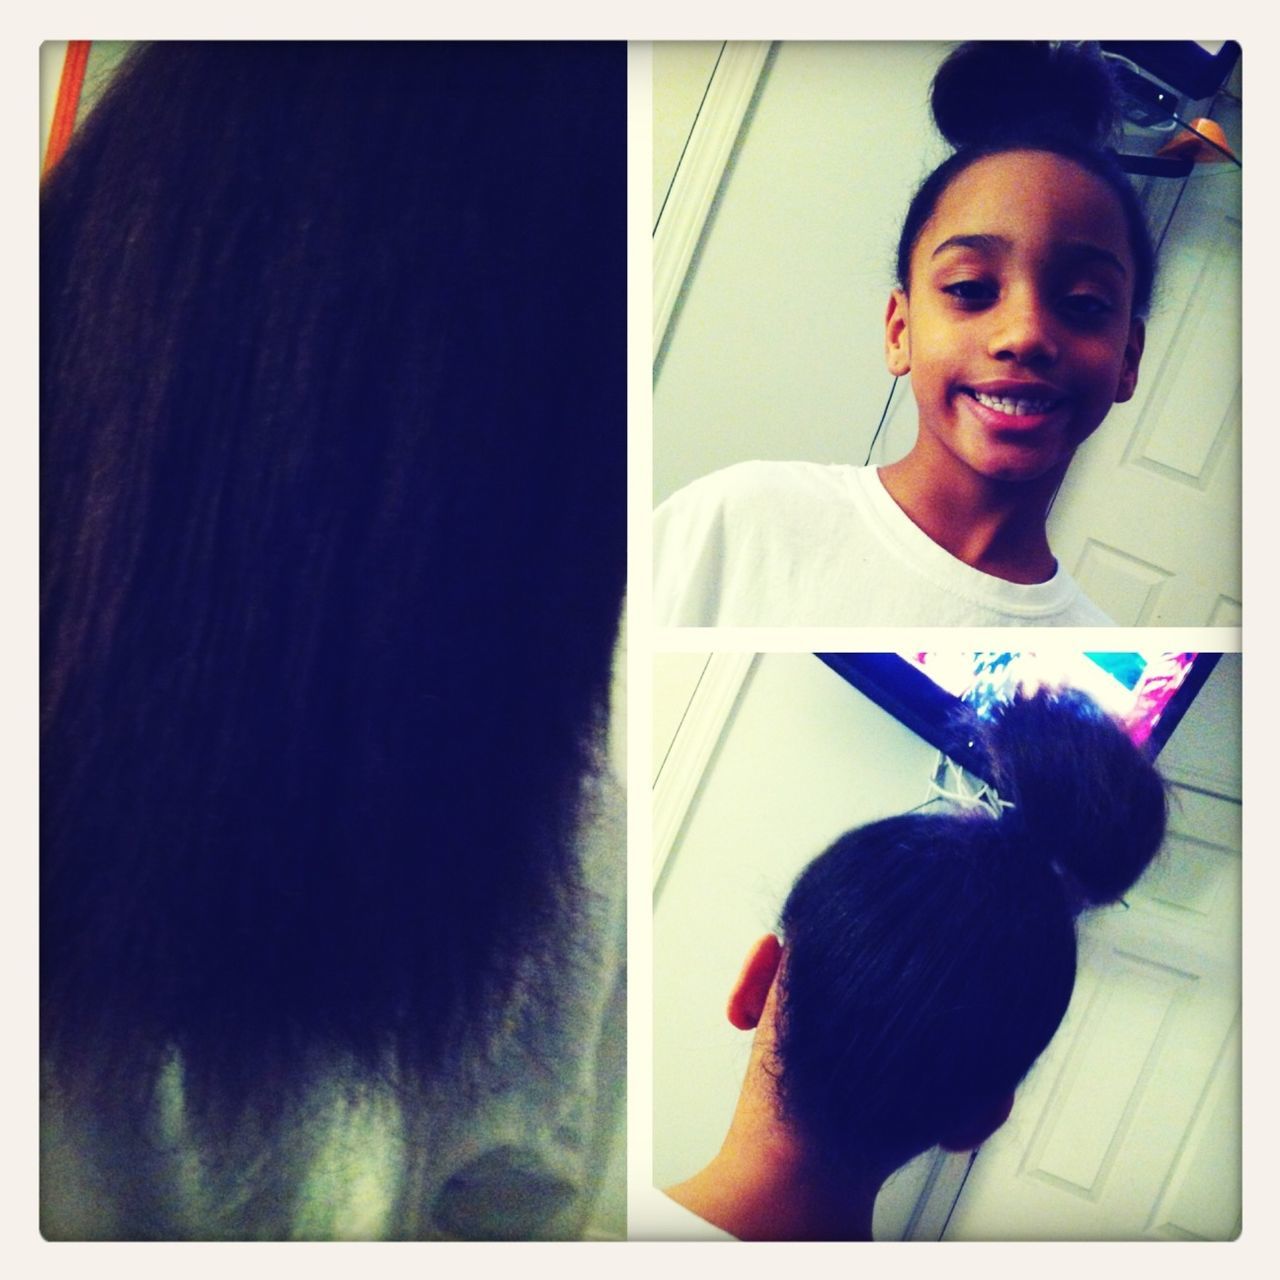 She Wanted Me To Straighten Her Hair (: